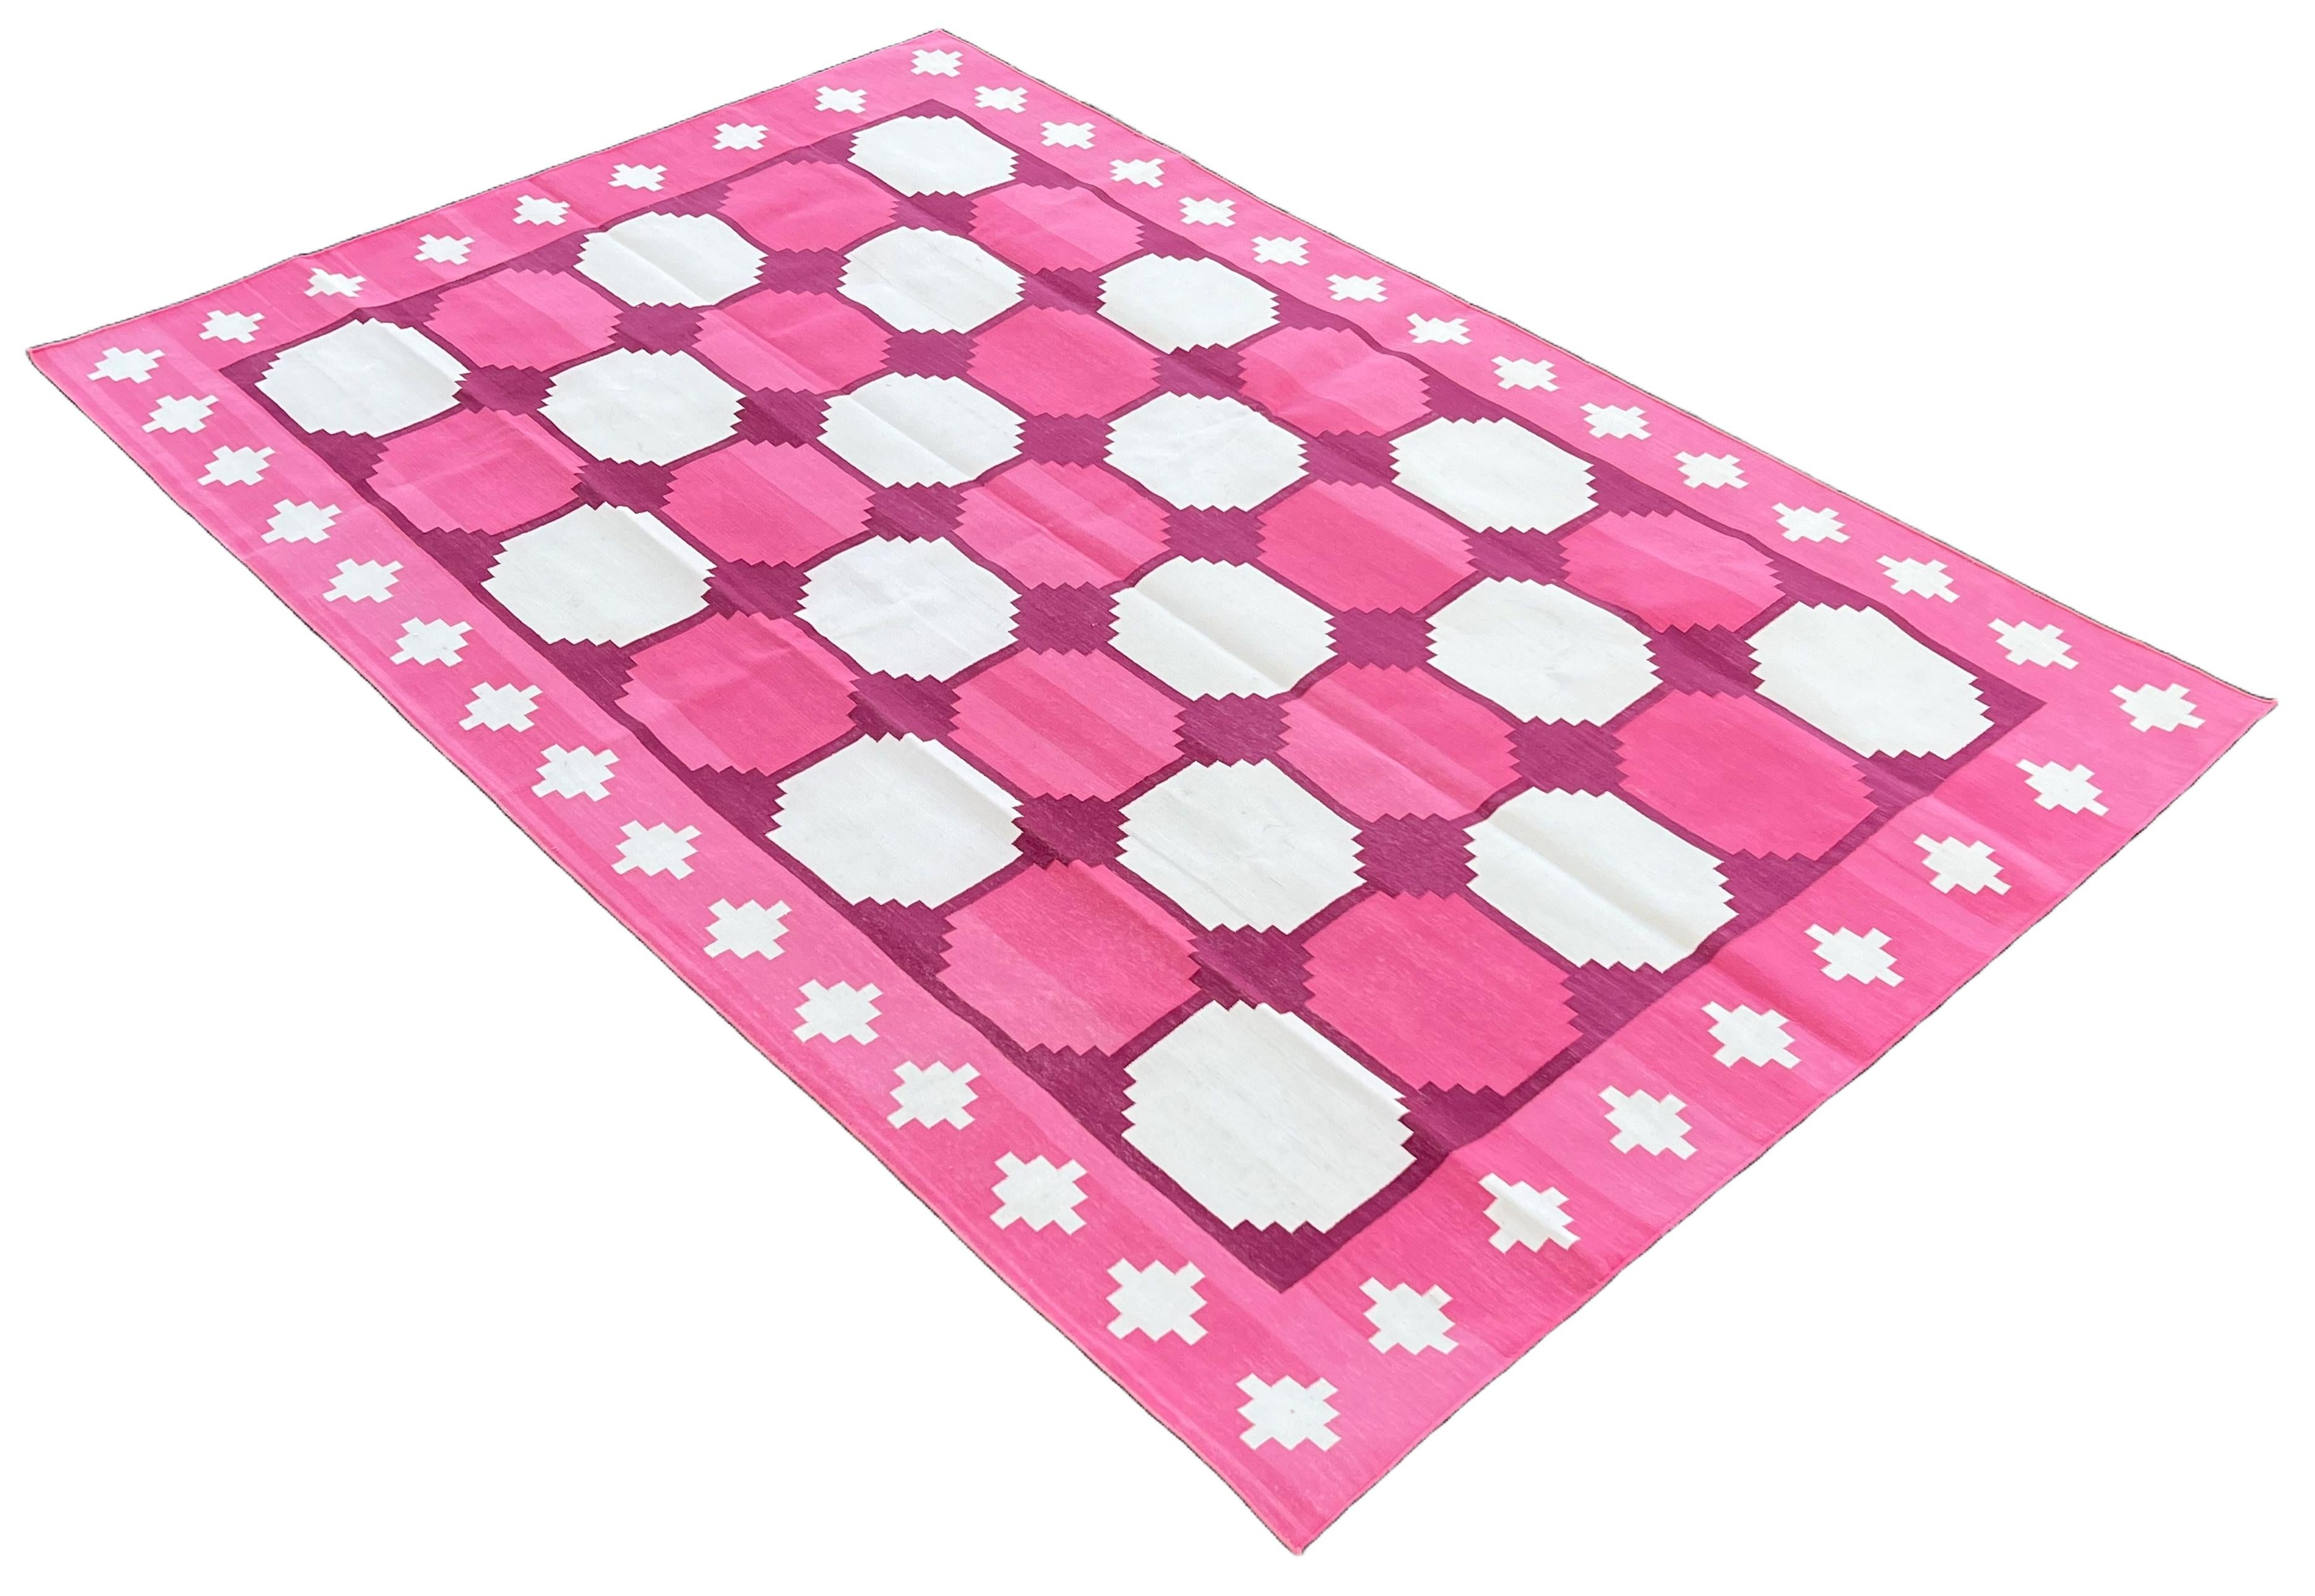 Cotton Vegetable Dyed Reversible Pink And White Indian Star Geometric Rug - 6'x9'
These special flat-weave dhurries are hand-woven with 15 ply 100% cotton yarn. Due to the special manufacturing techniques used to create our rugs, the size and color